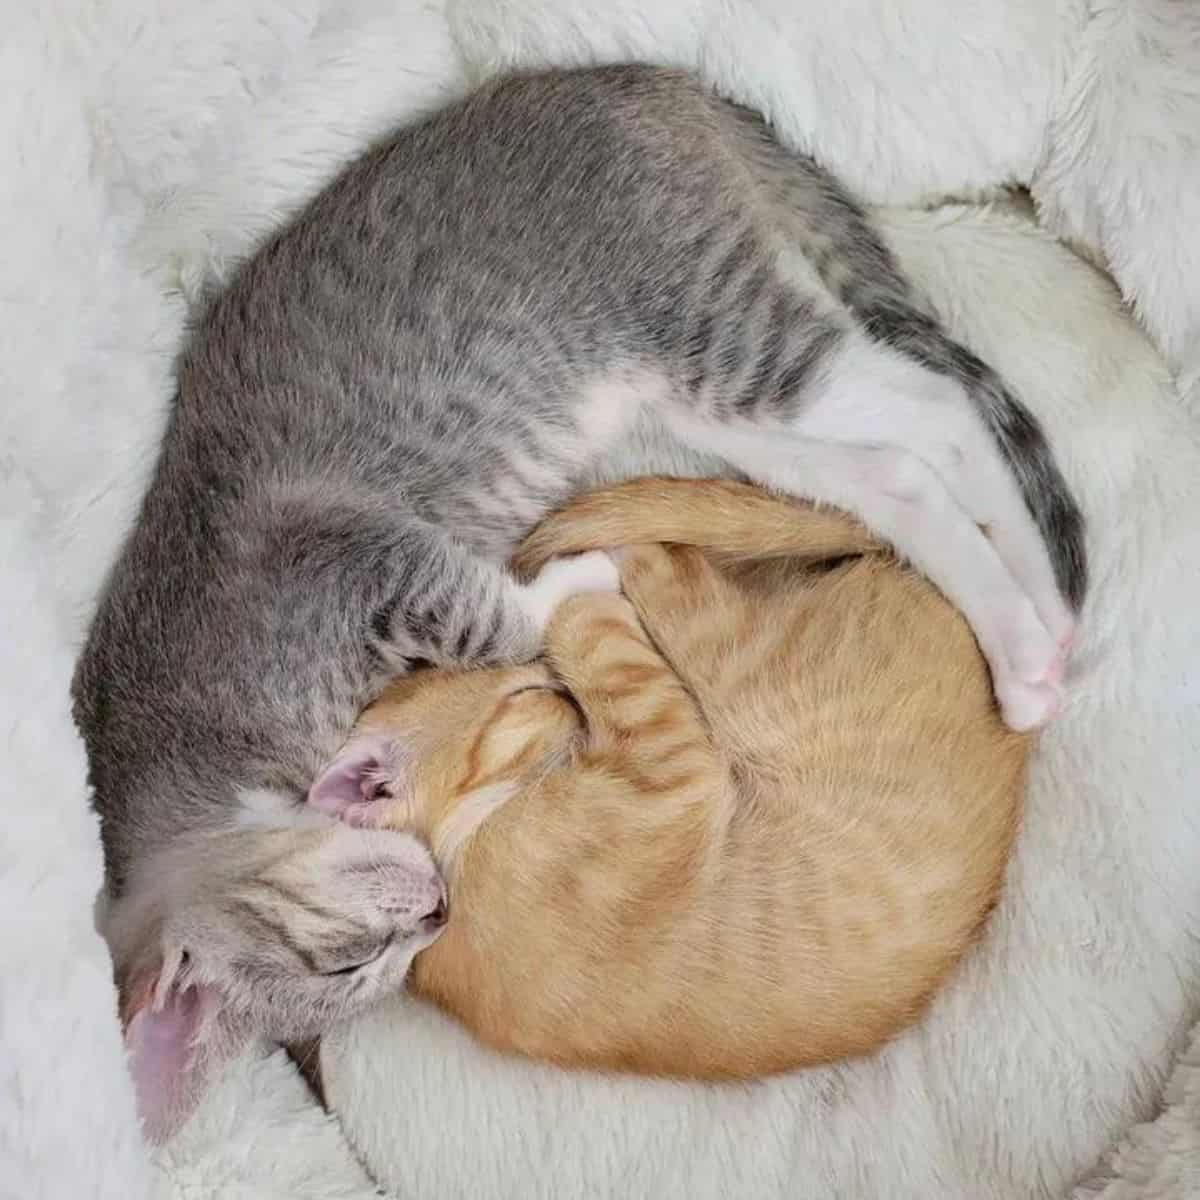 cat and kitten curled up together